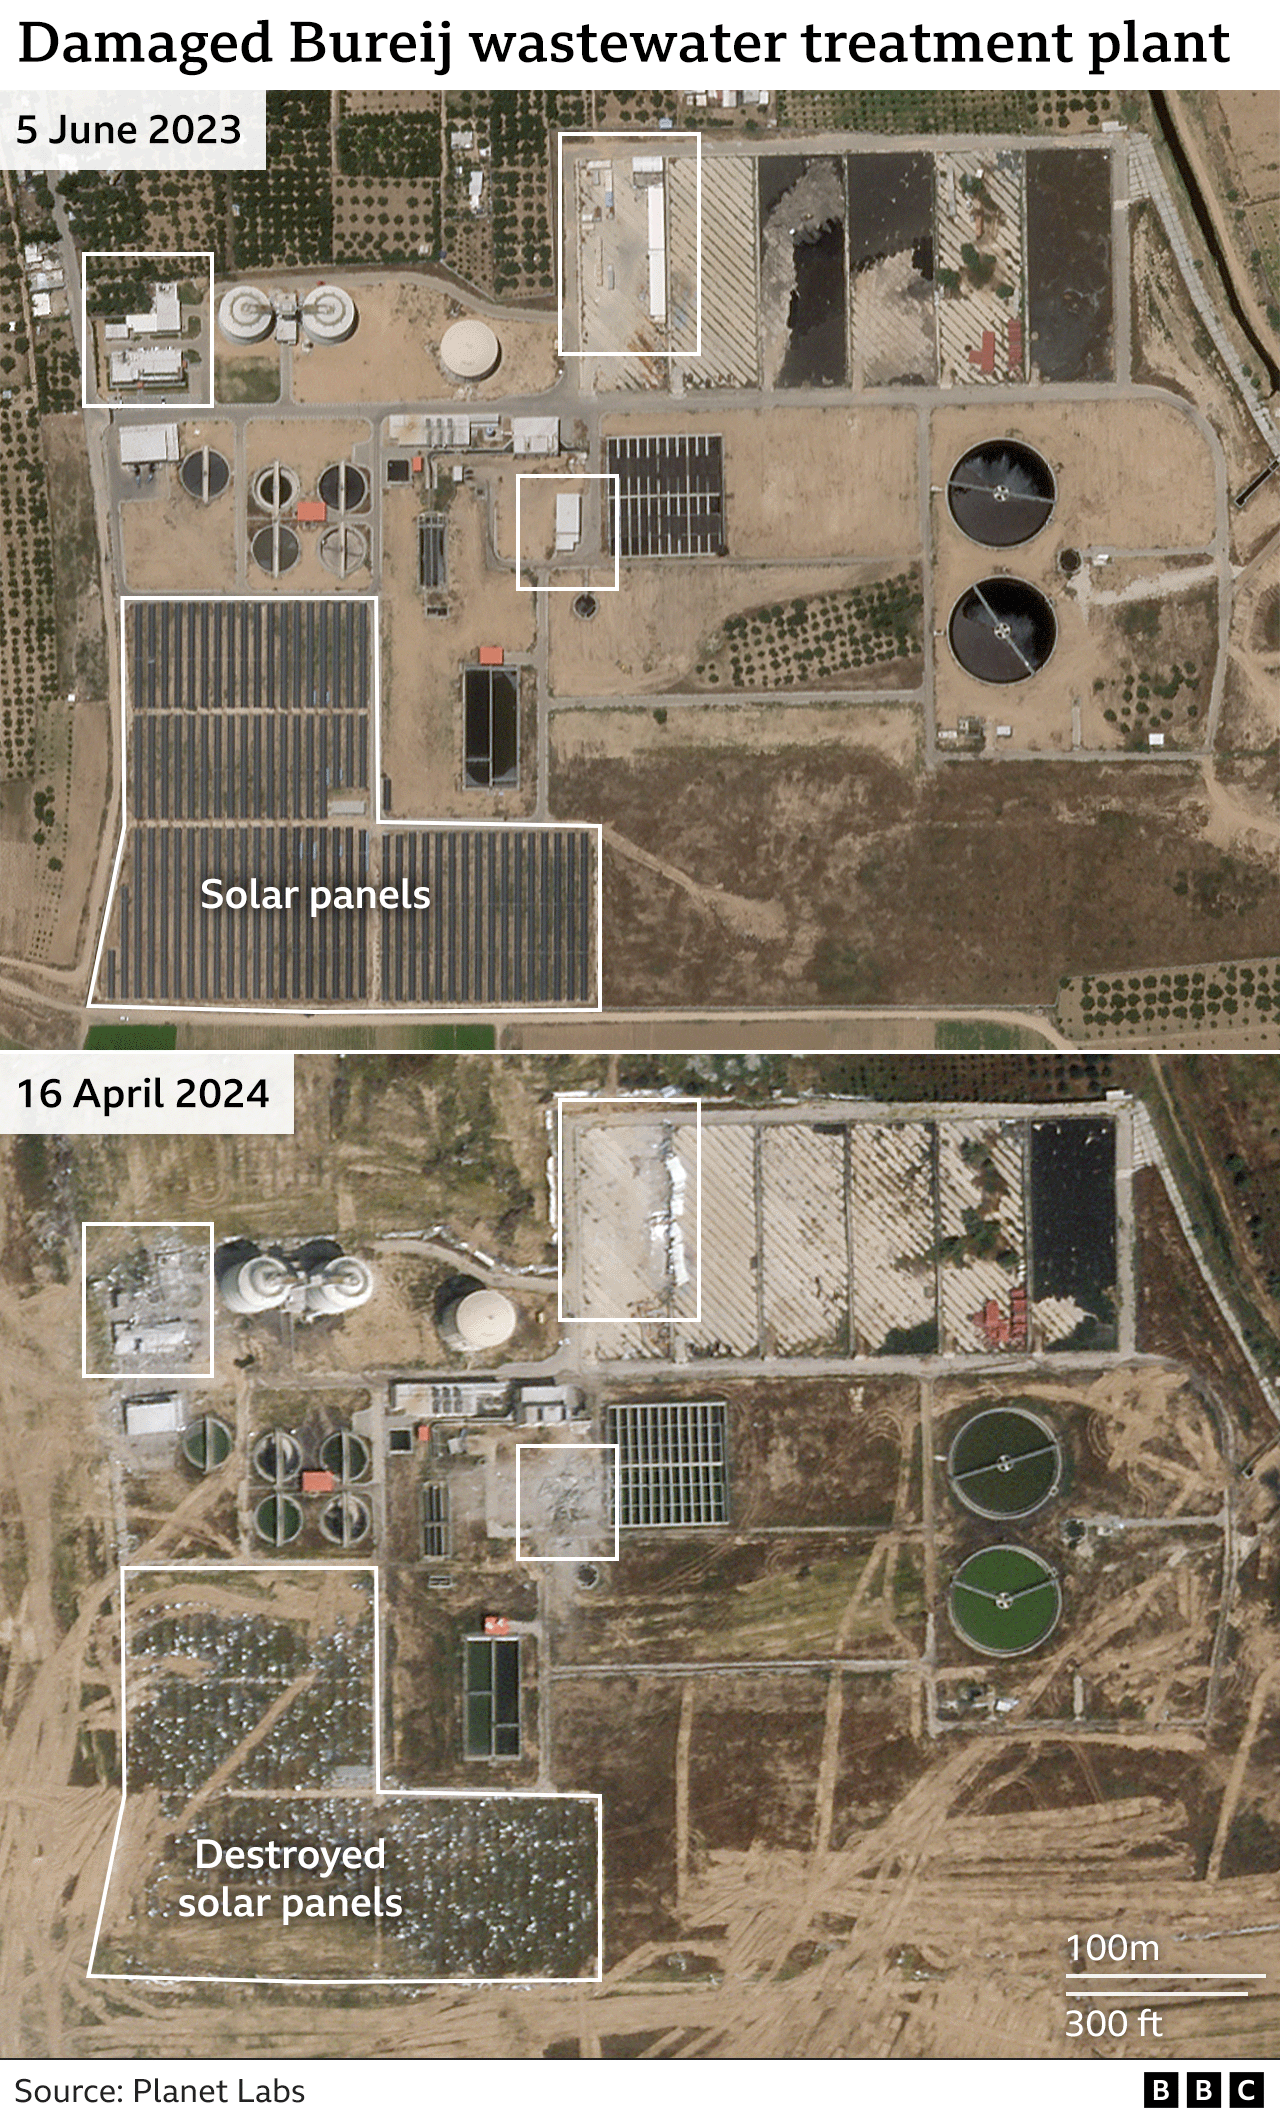 A before and after satellite image of the the damaged Bureij wastewater treatment plant from 5 June 2023 and 16 April 20234. The images show show destroyed solar panels.